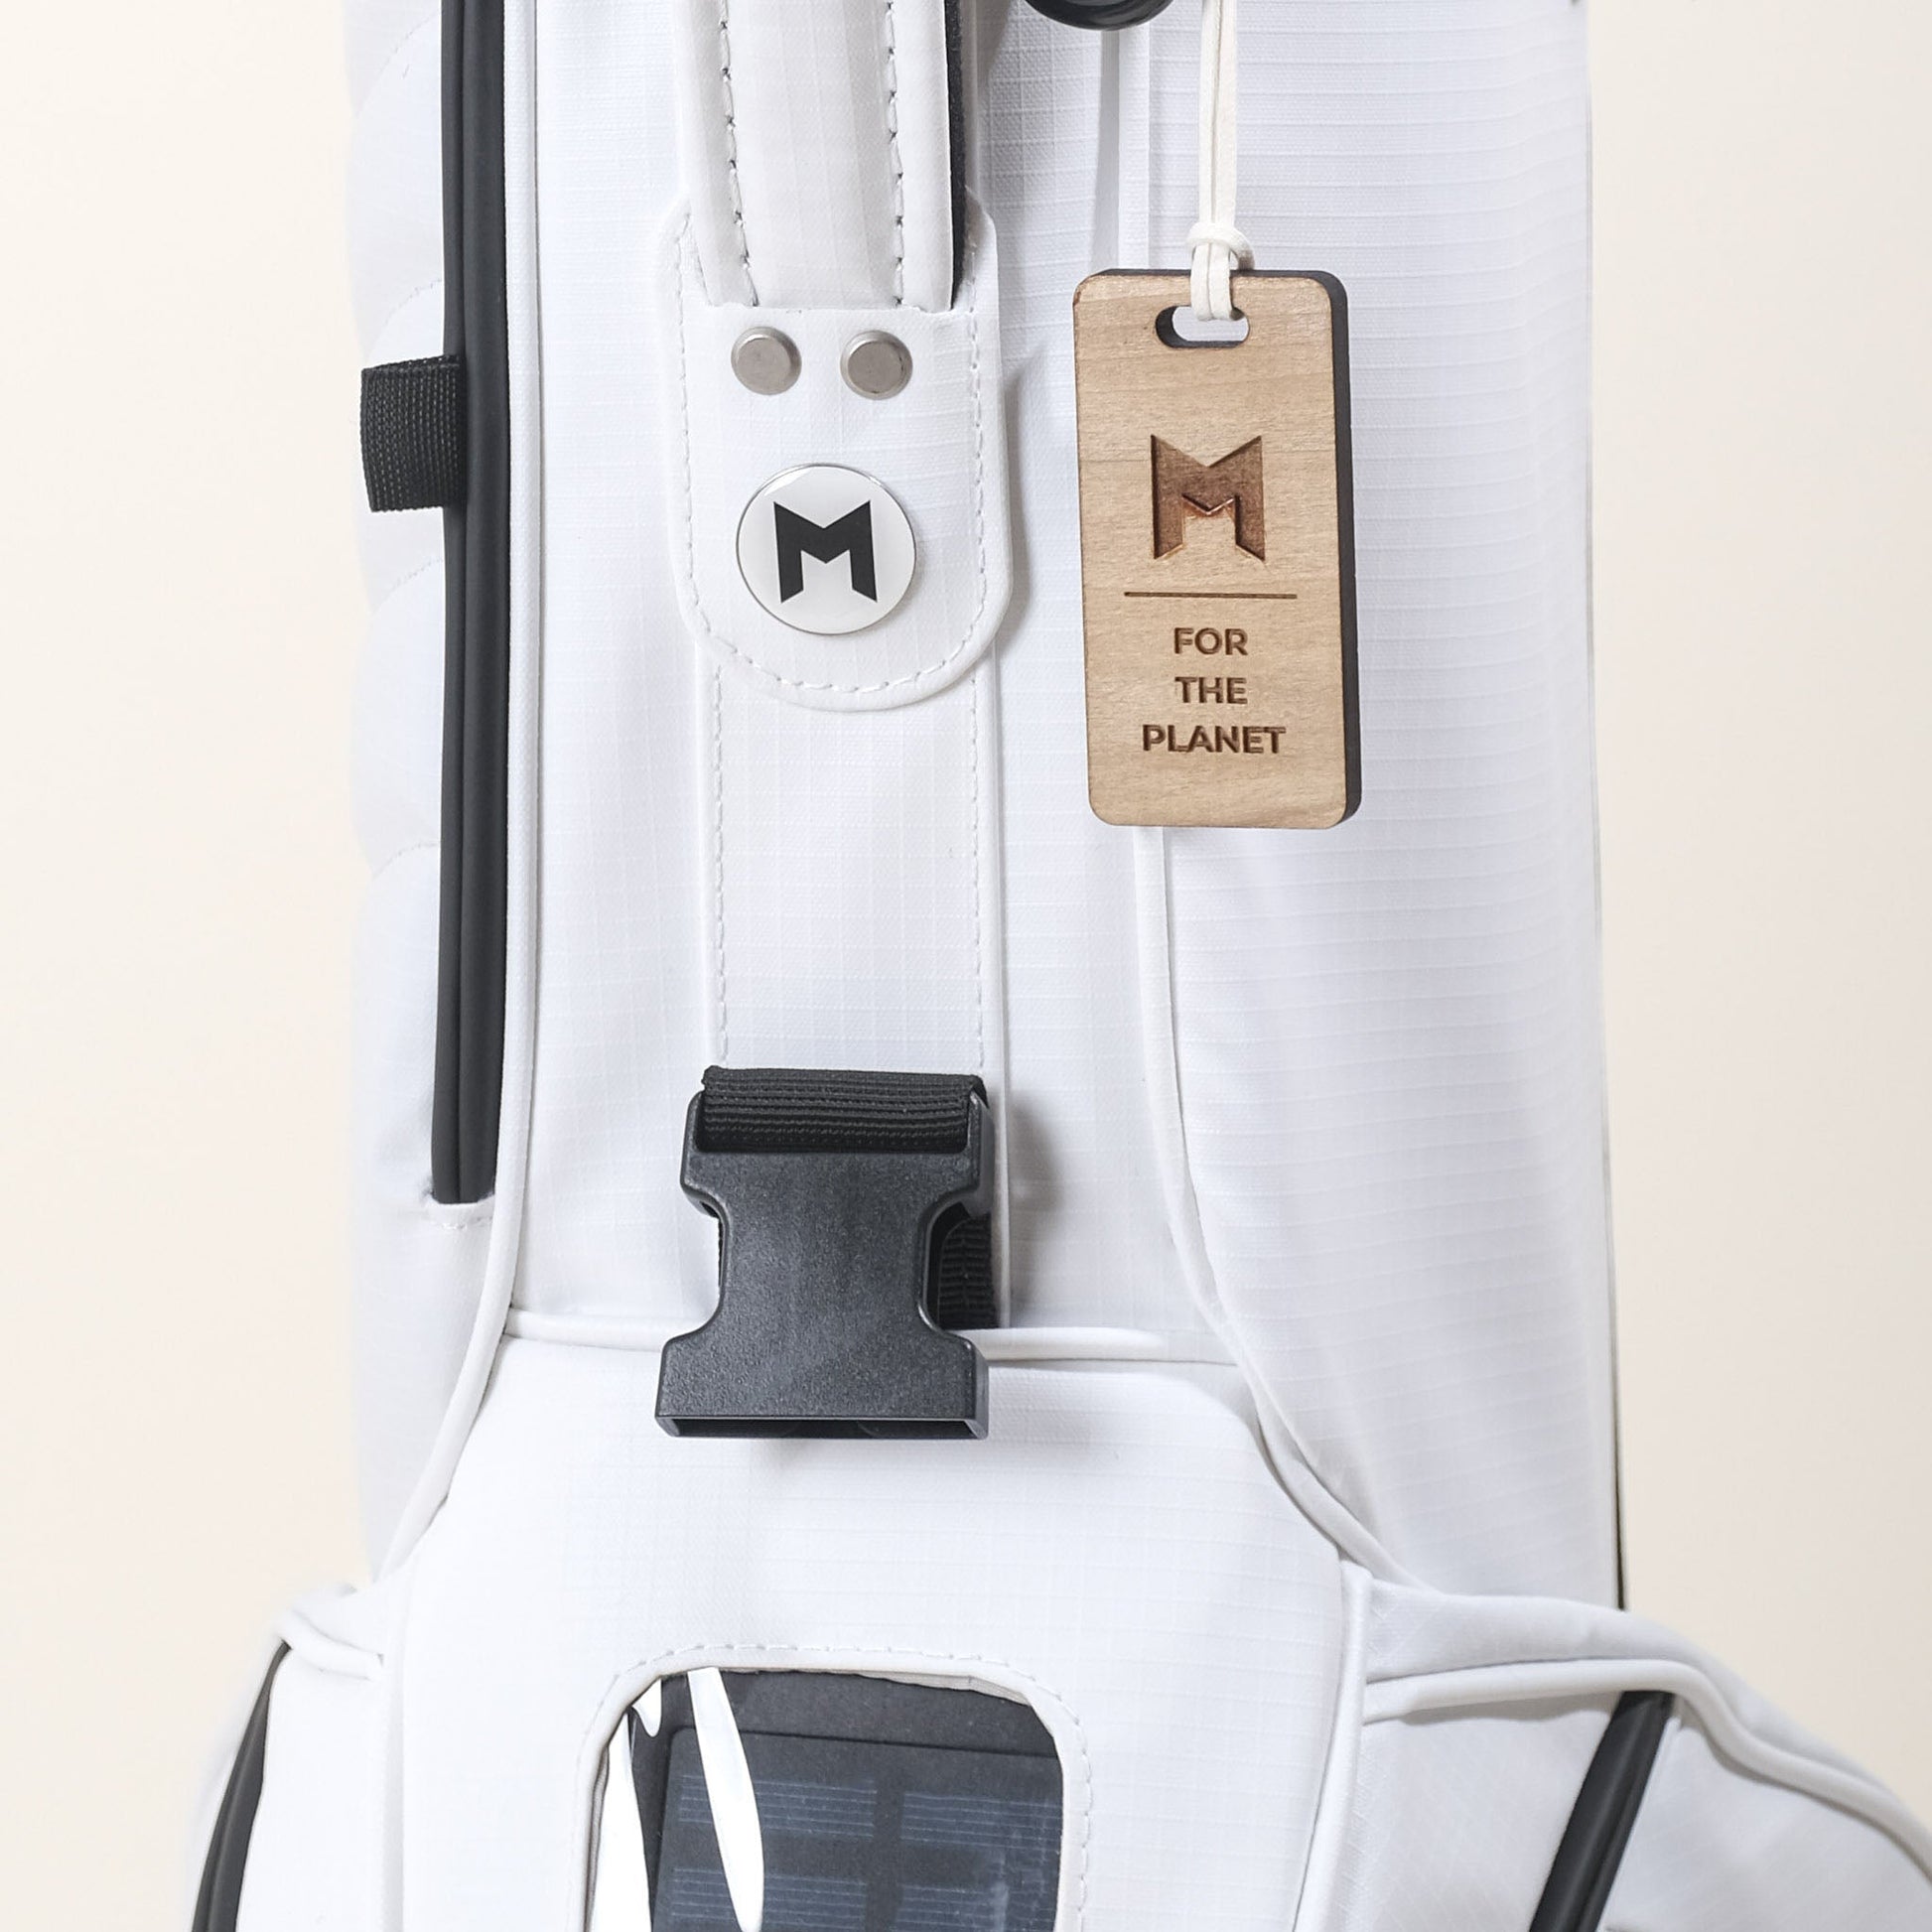 The new MR1 golf bag is made from 100% recycled material, available in white or black